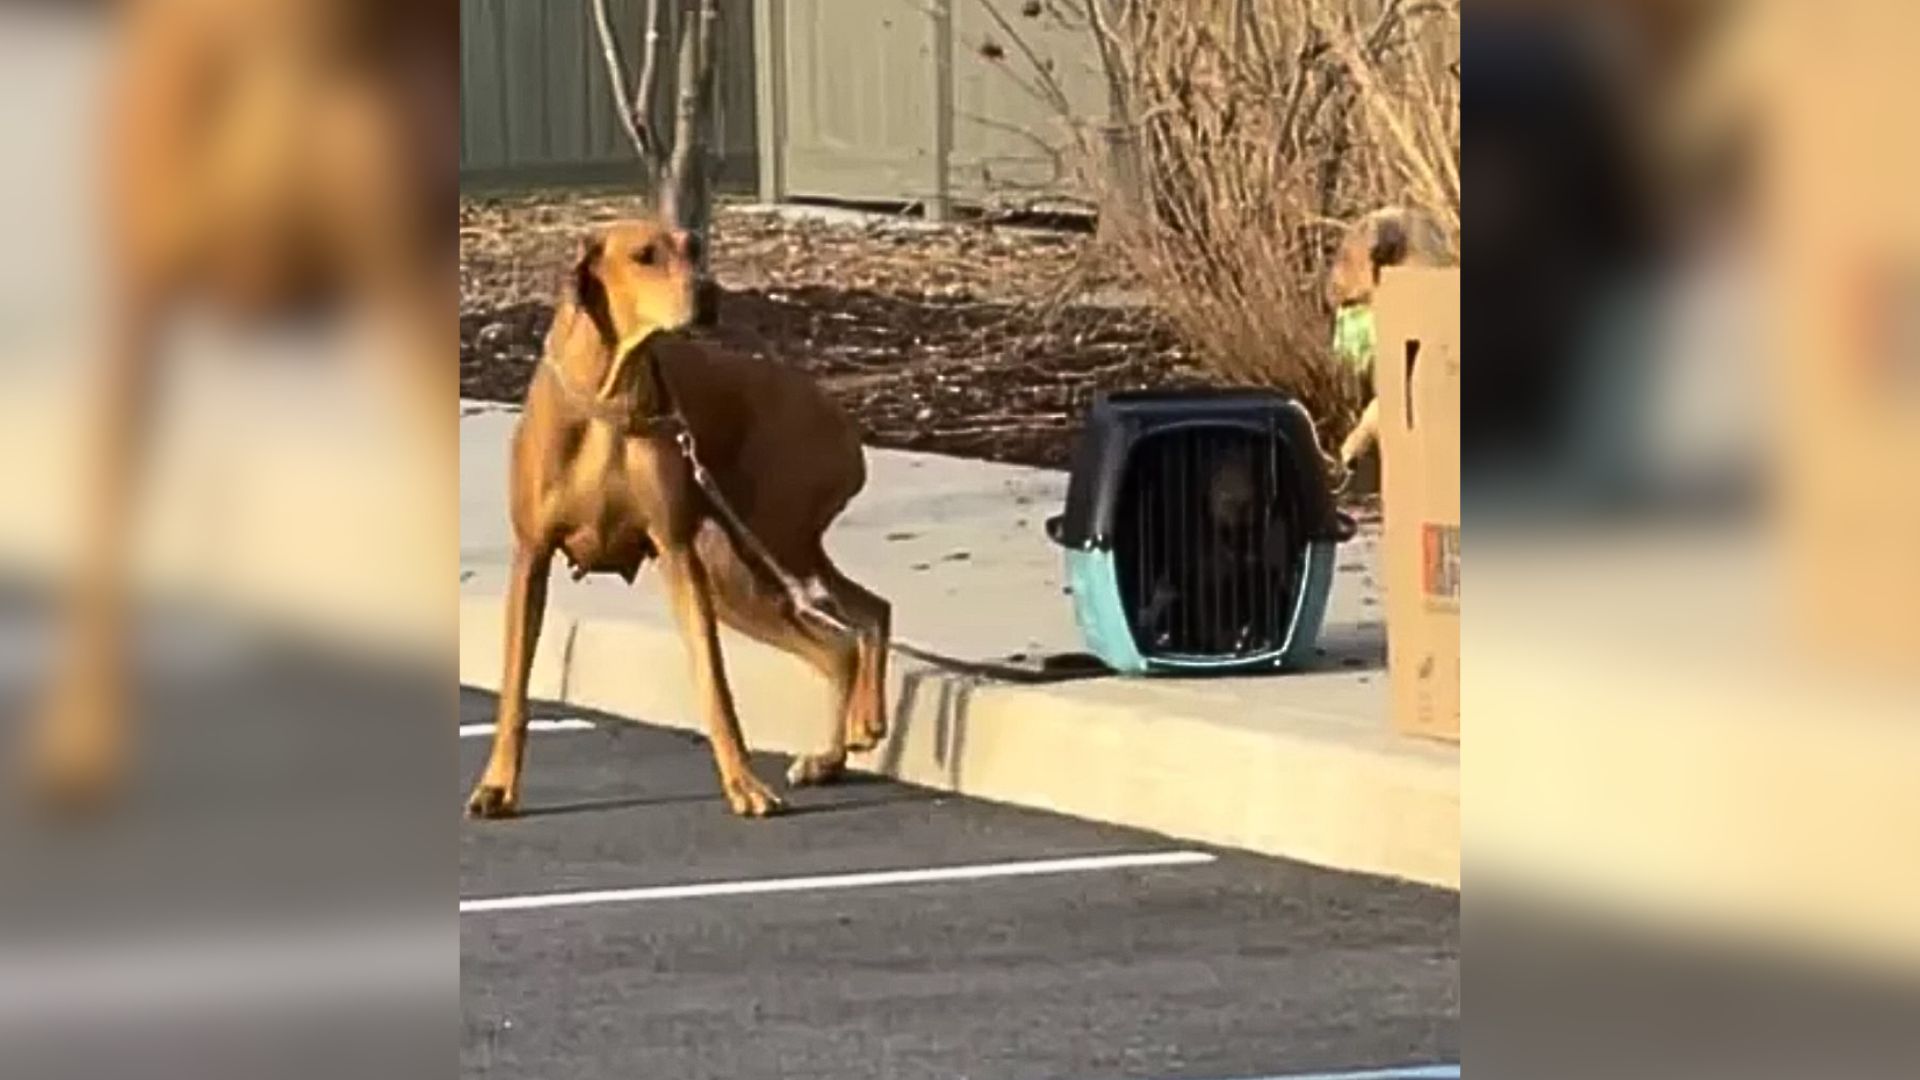 Mom Dog Found Cruelly Tied To A Crate Full Of Puppies And Abandoned On A Sidewalk